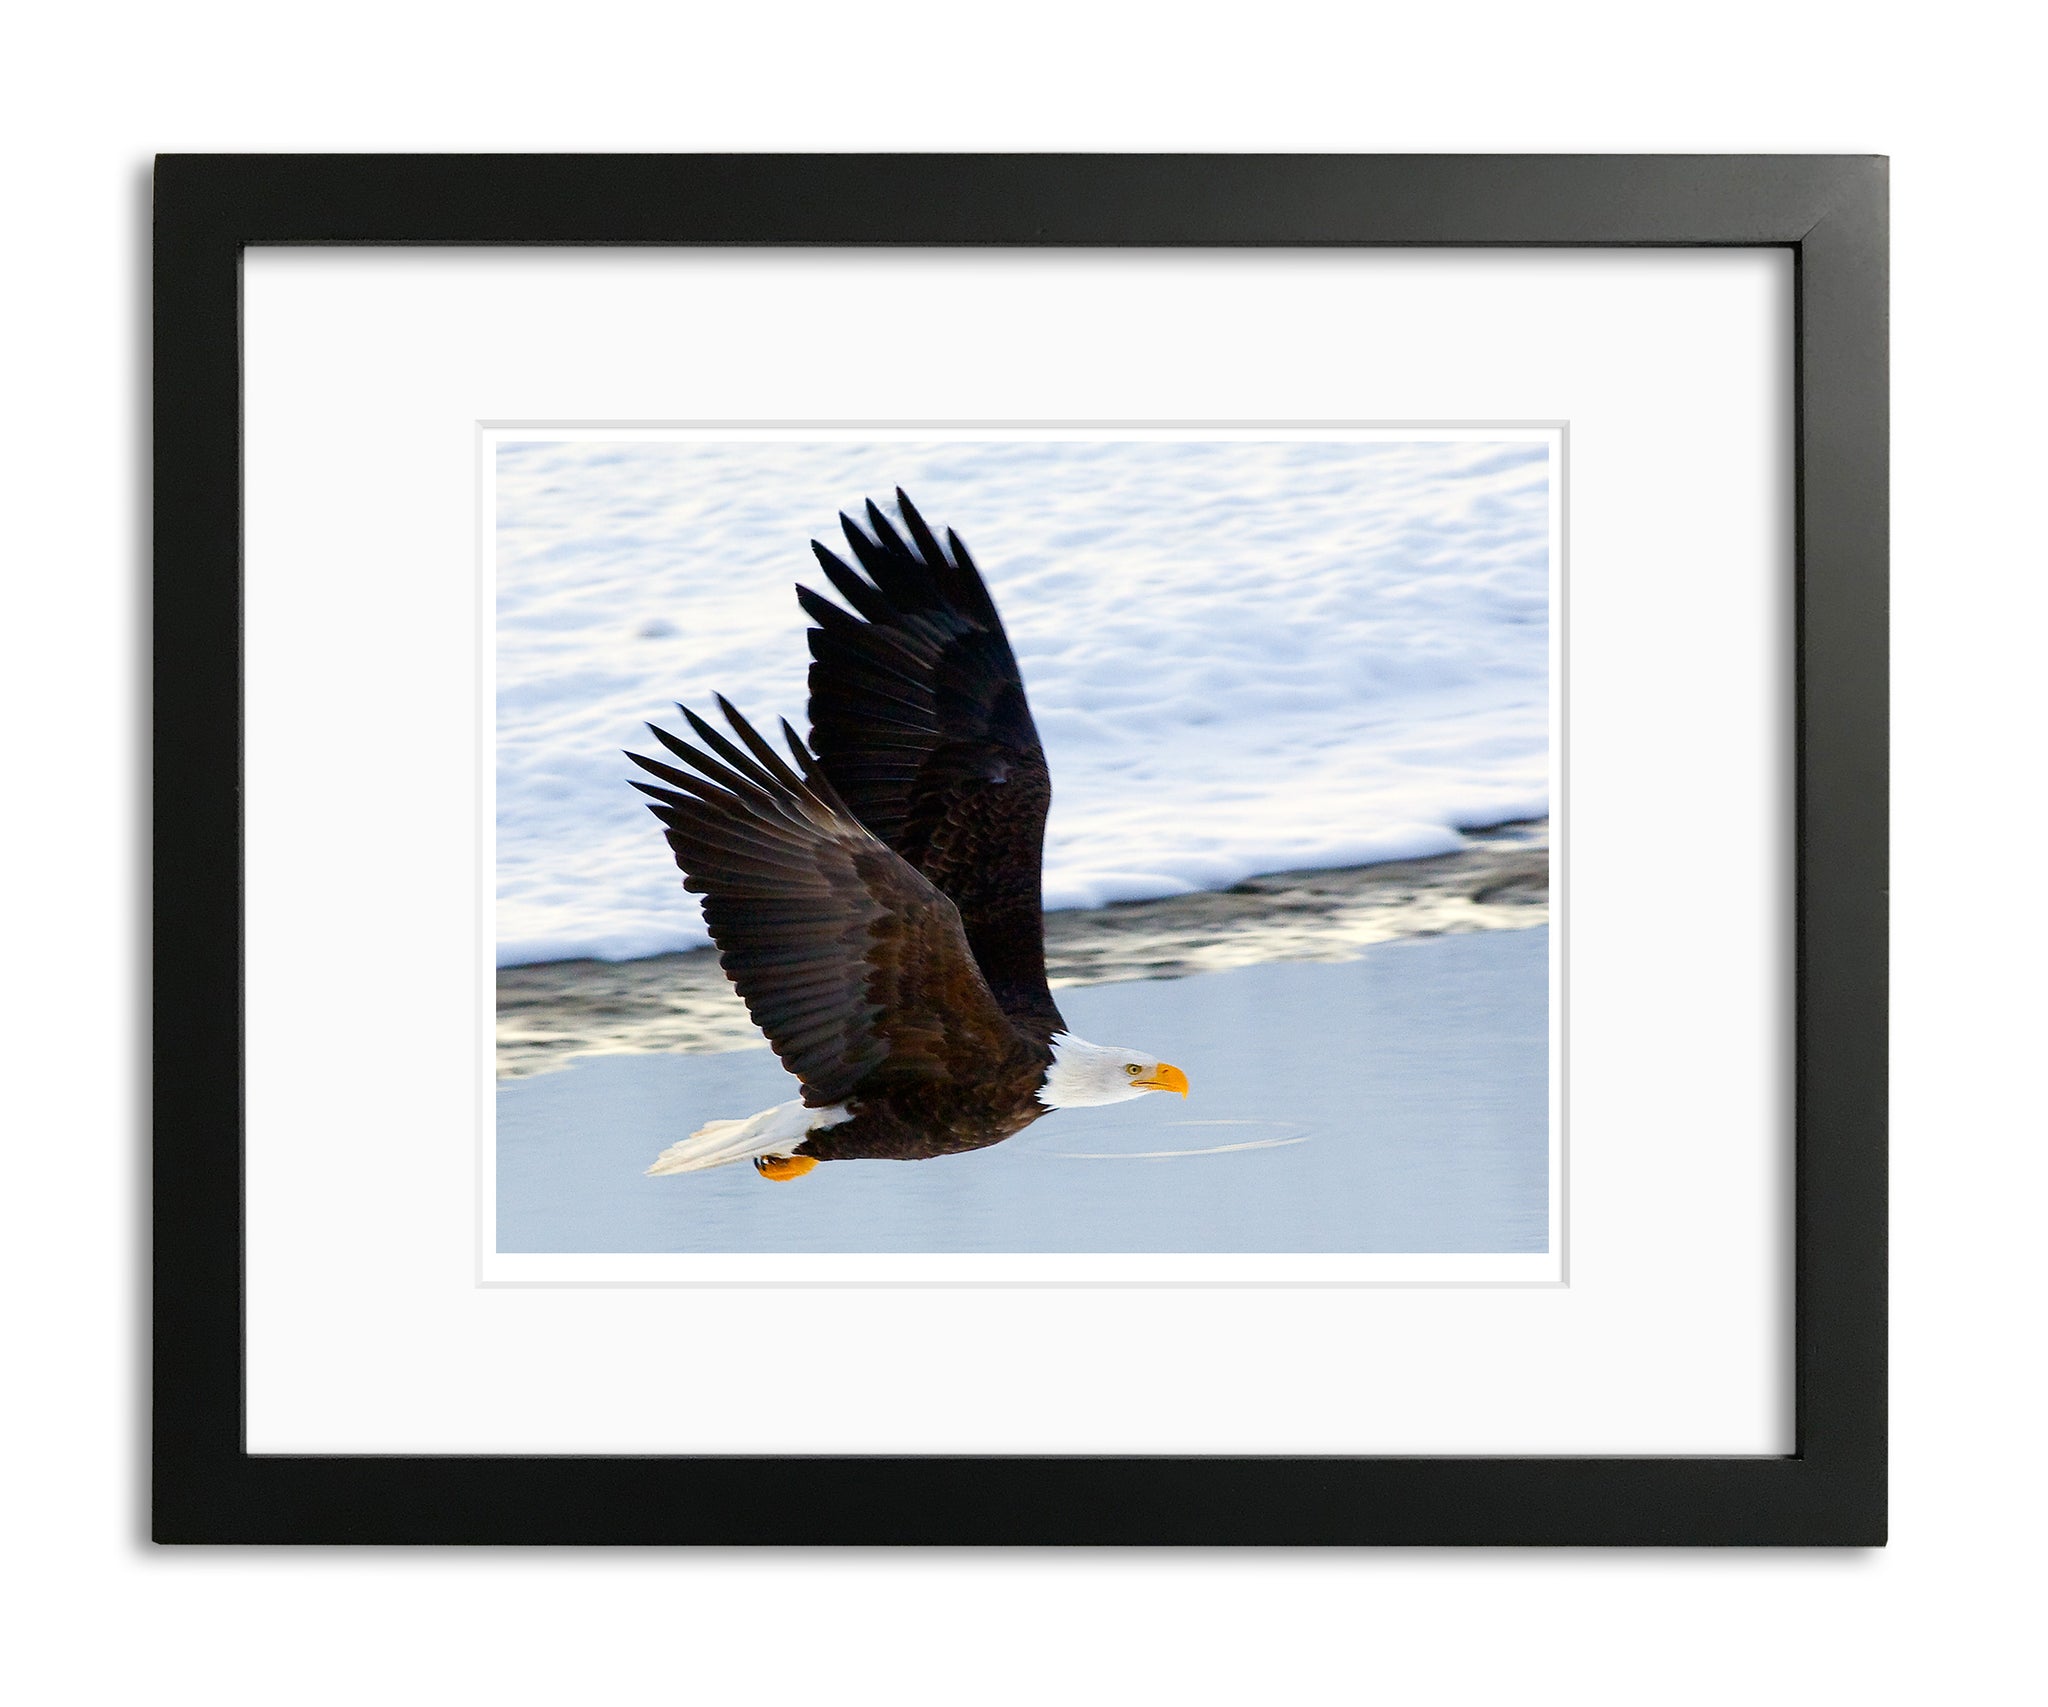 Magnificent Bald Eagle, Haines, Alaska, by Robert Ross